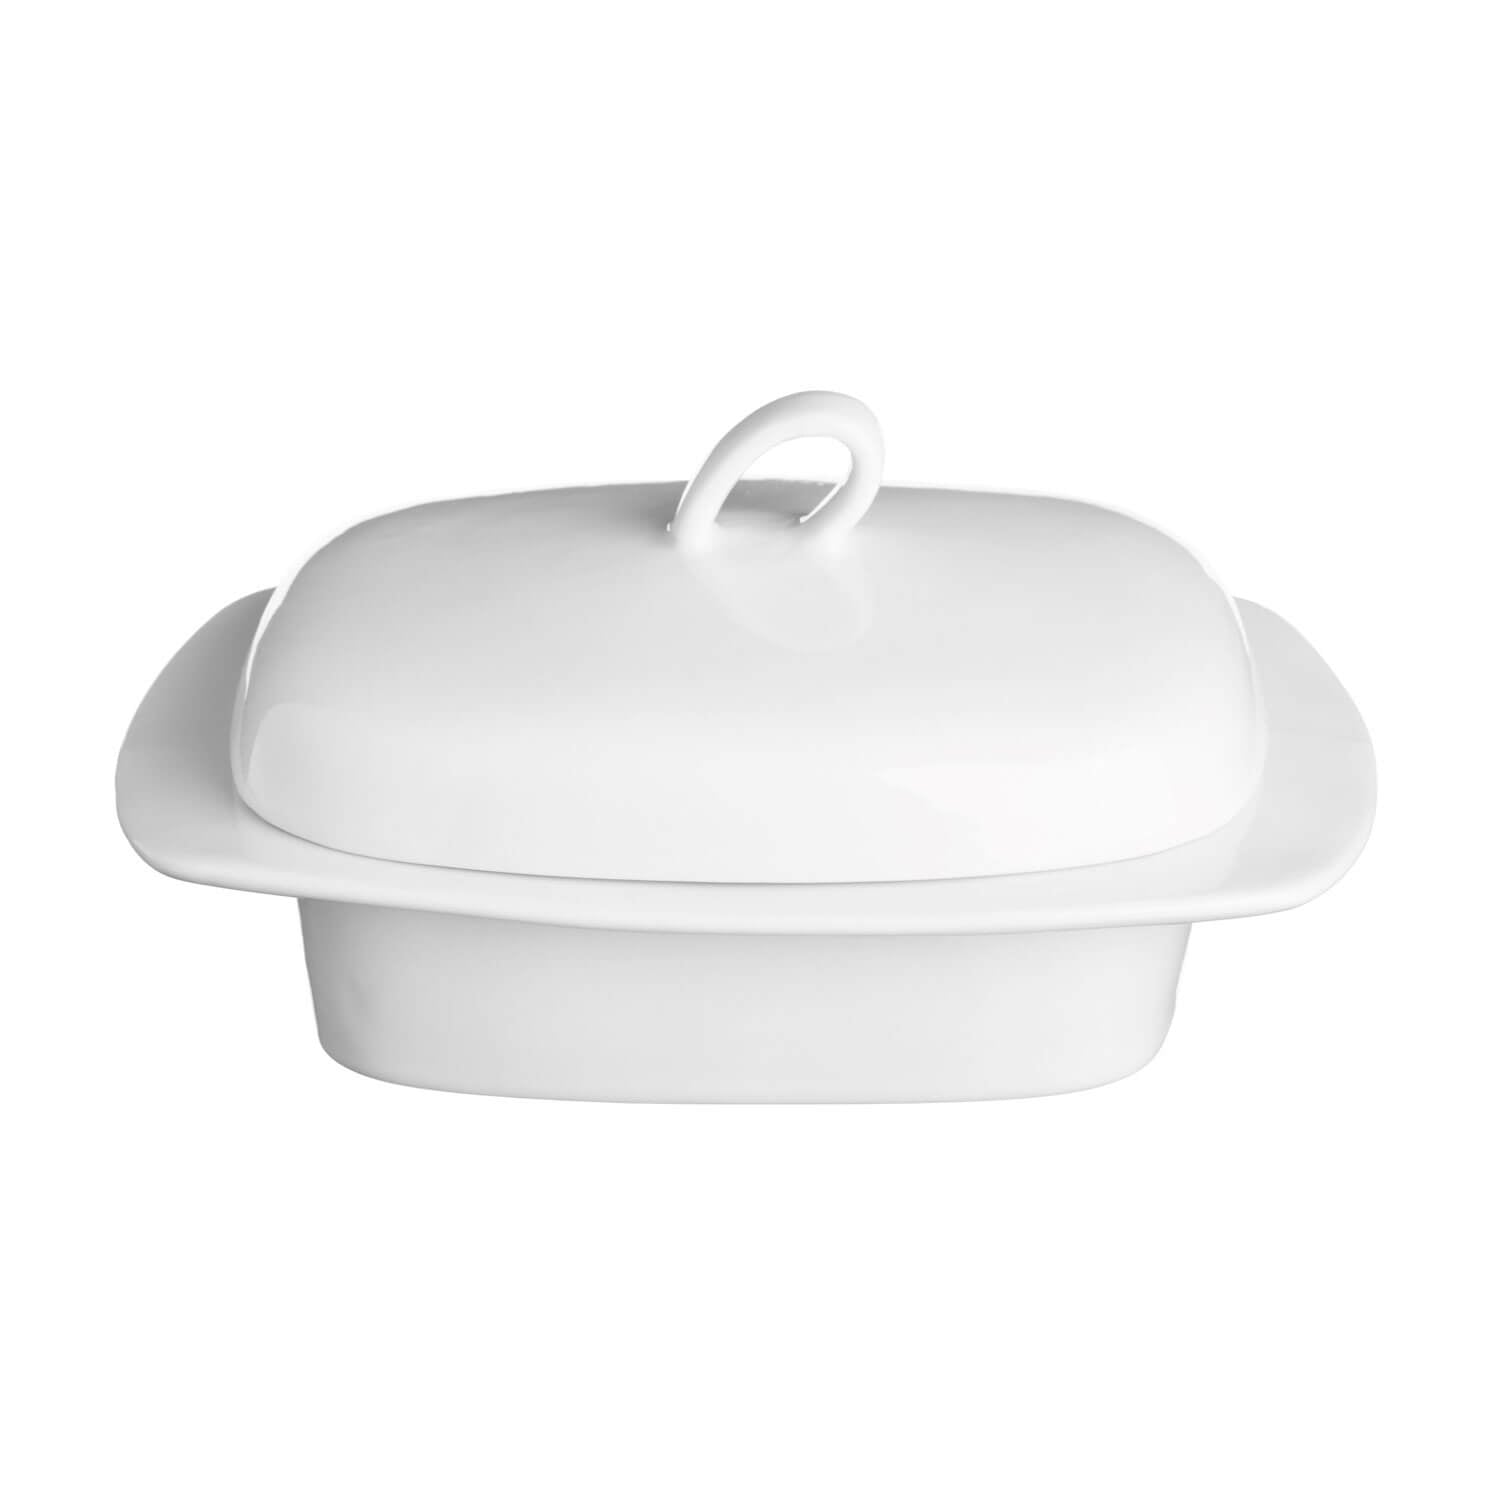 Price &amp; Kensington Simplicity Butter Dish with Lid 1 Shaws Department Stores